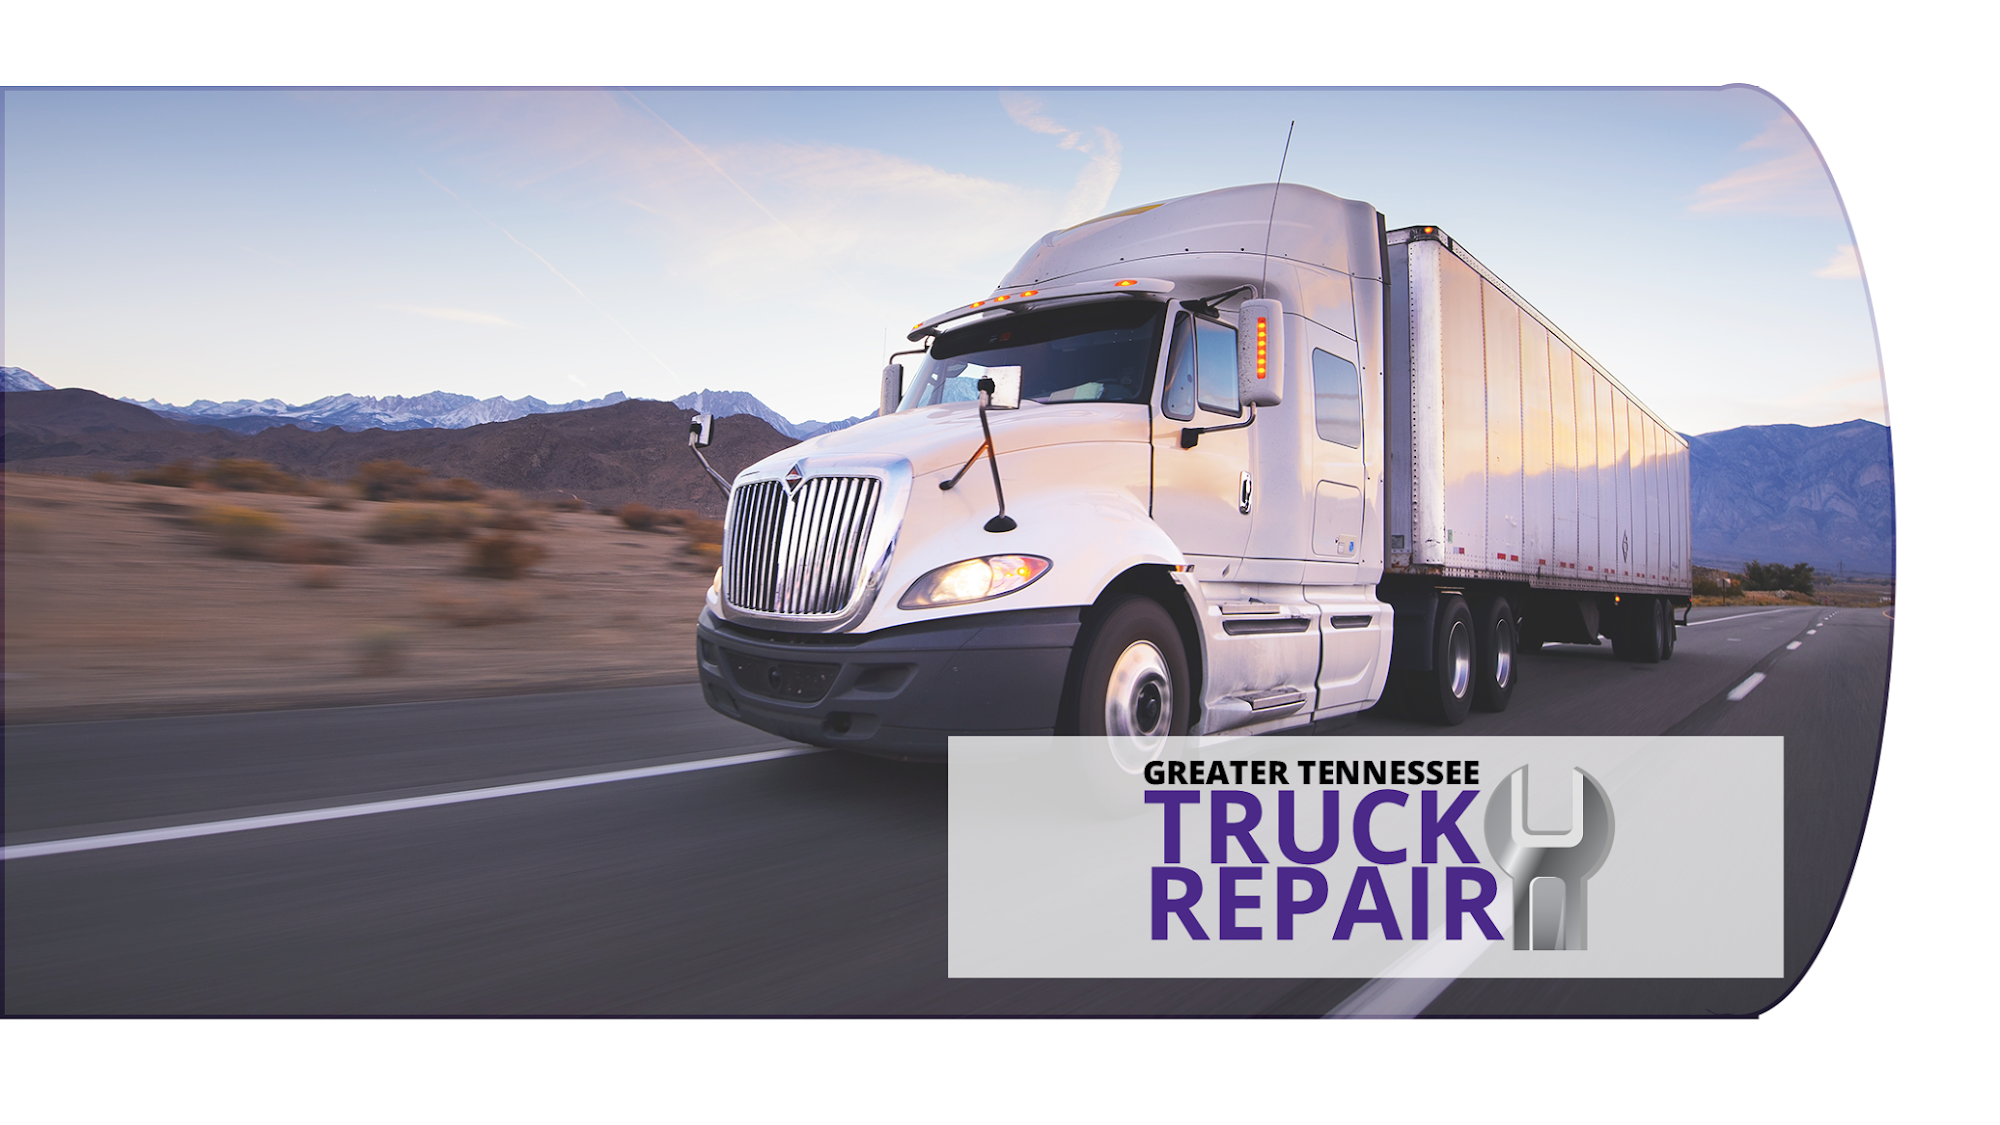 Greater Tennessee Truck Repair